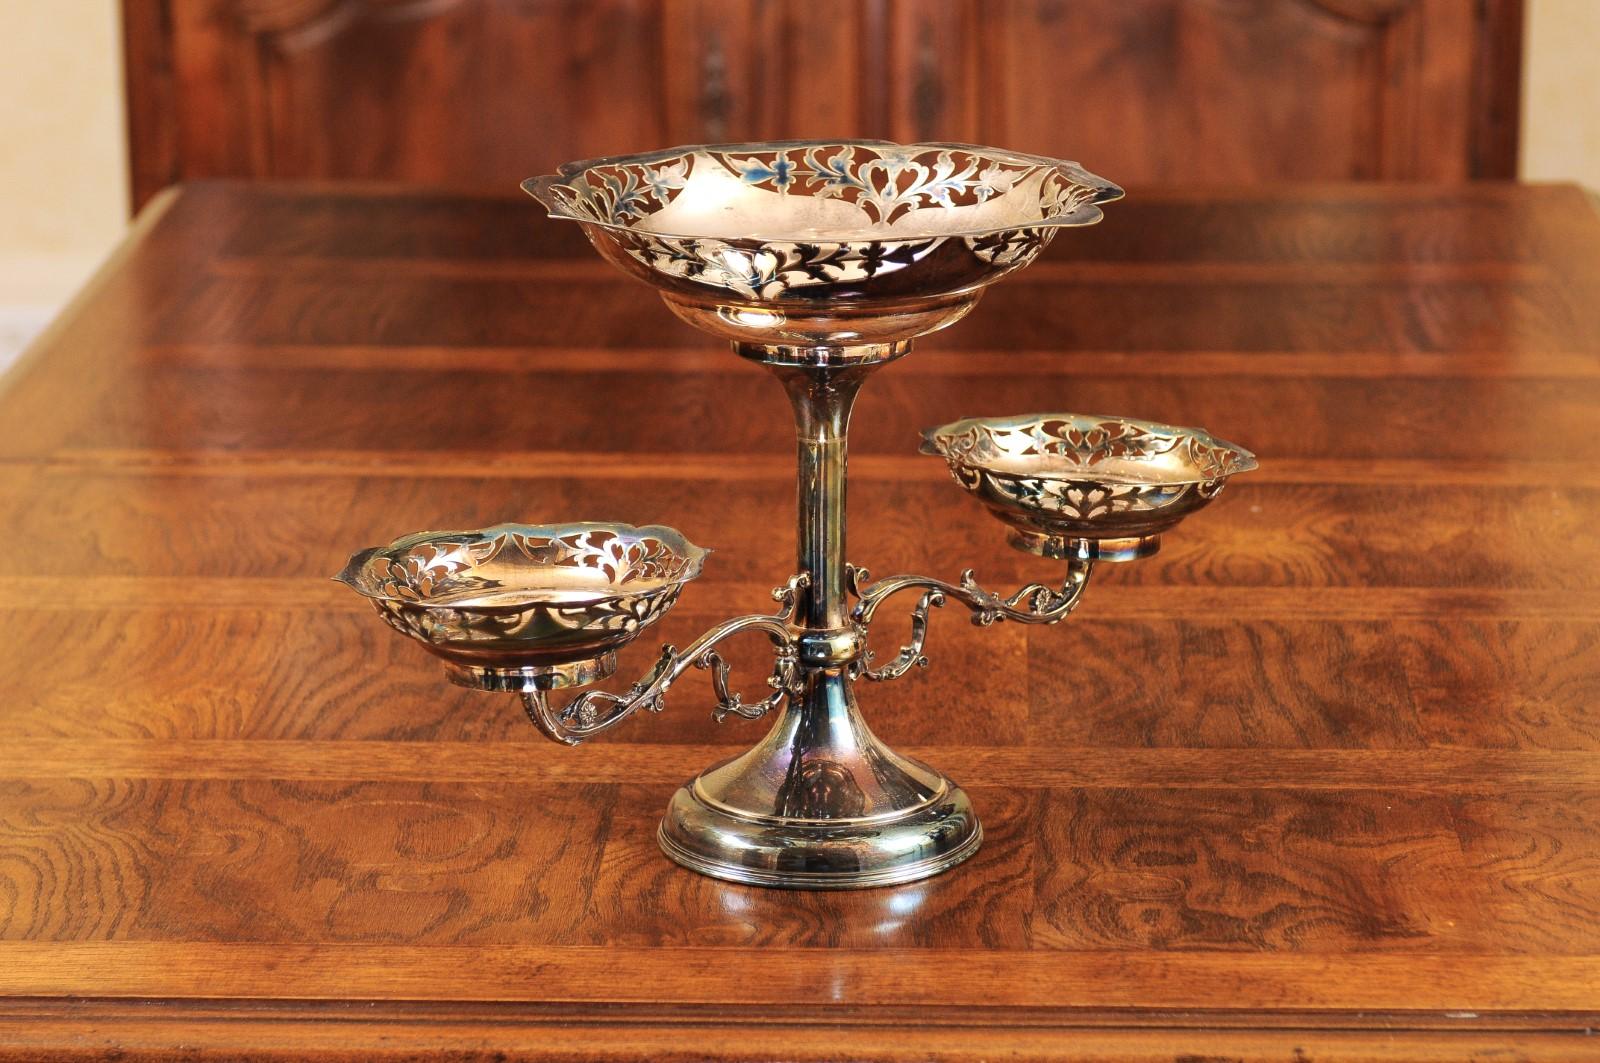 French 19th Century Silver Epergne with Pierced Foliage and Scrolling Motifs For Sale 13